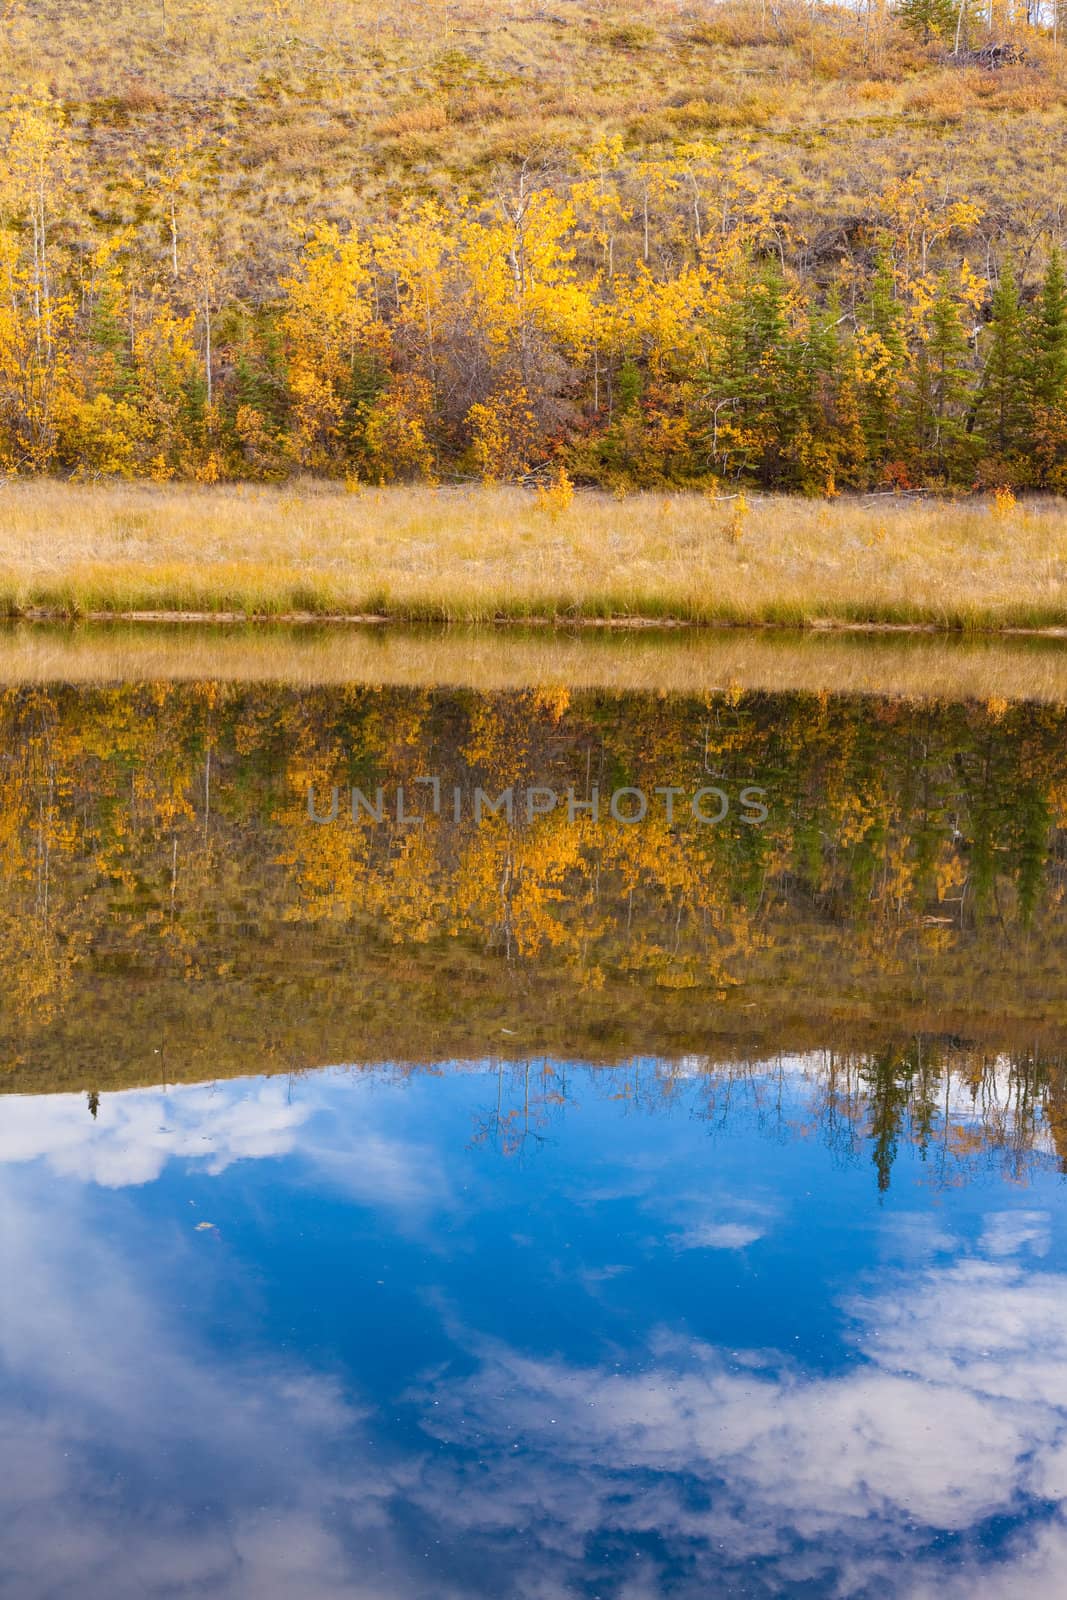 Fall-colored boreal forest (taiga) of Yukon Territory, Canada, reflected on calm surface of pond.